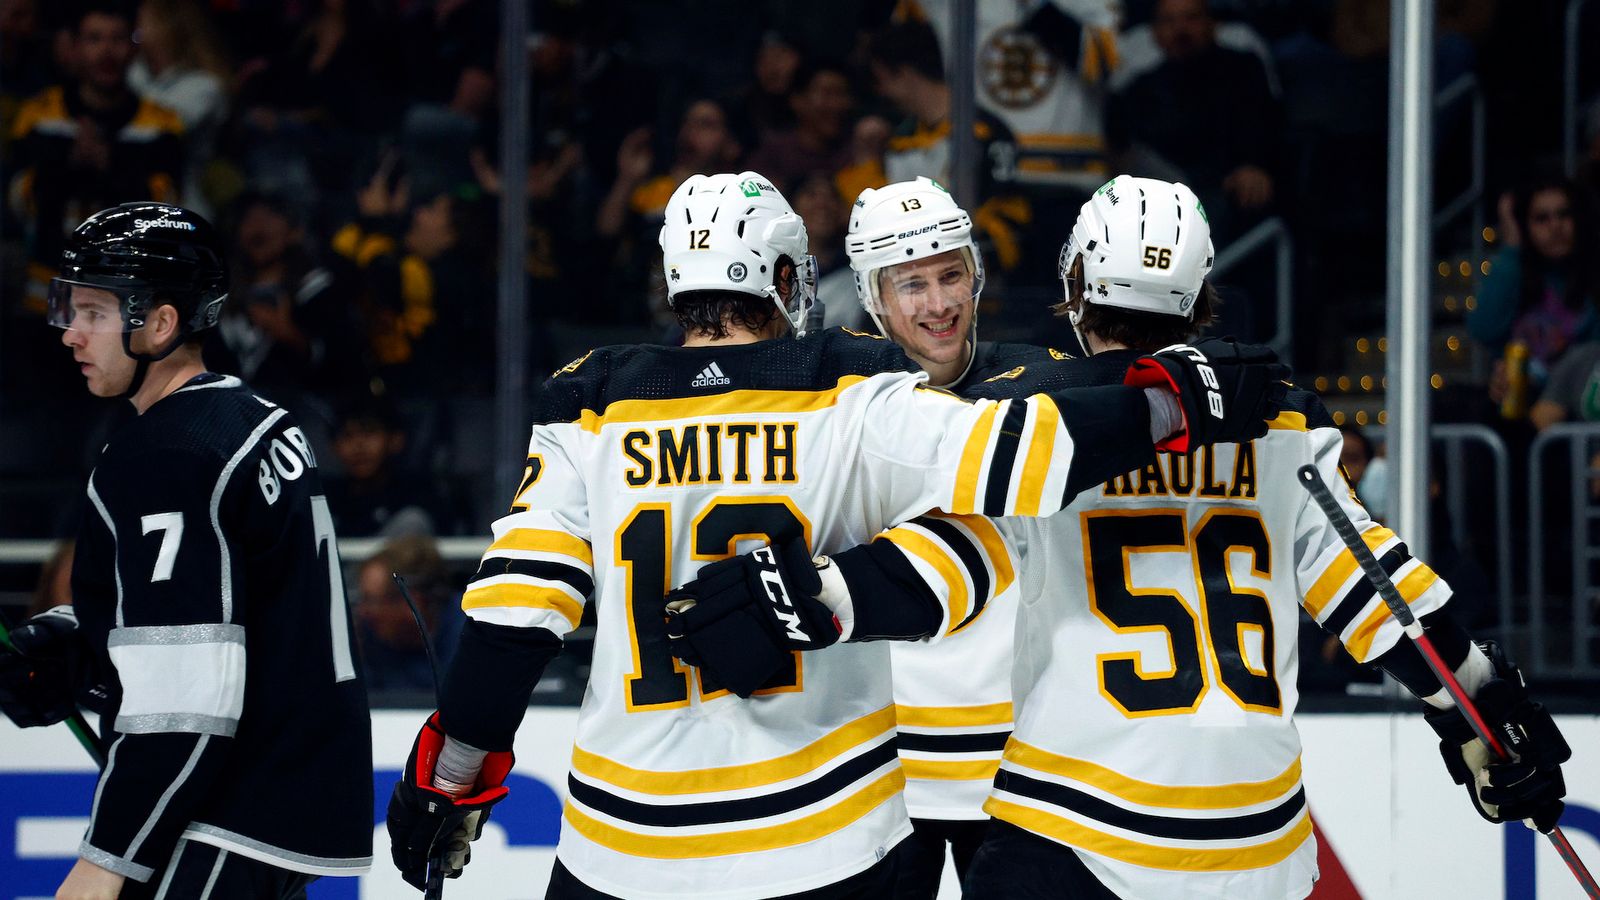 Coyle 'Excited' To Finally Get Winter Classic Moment With Bruins